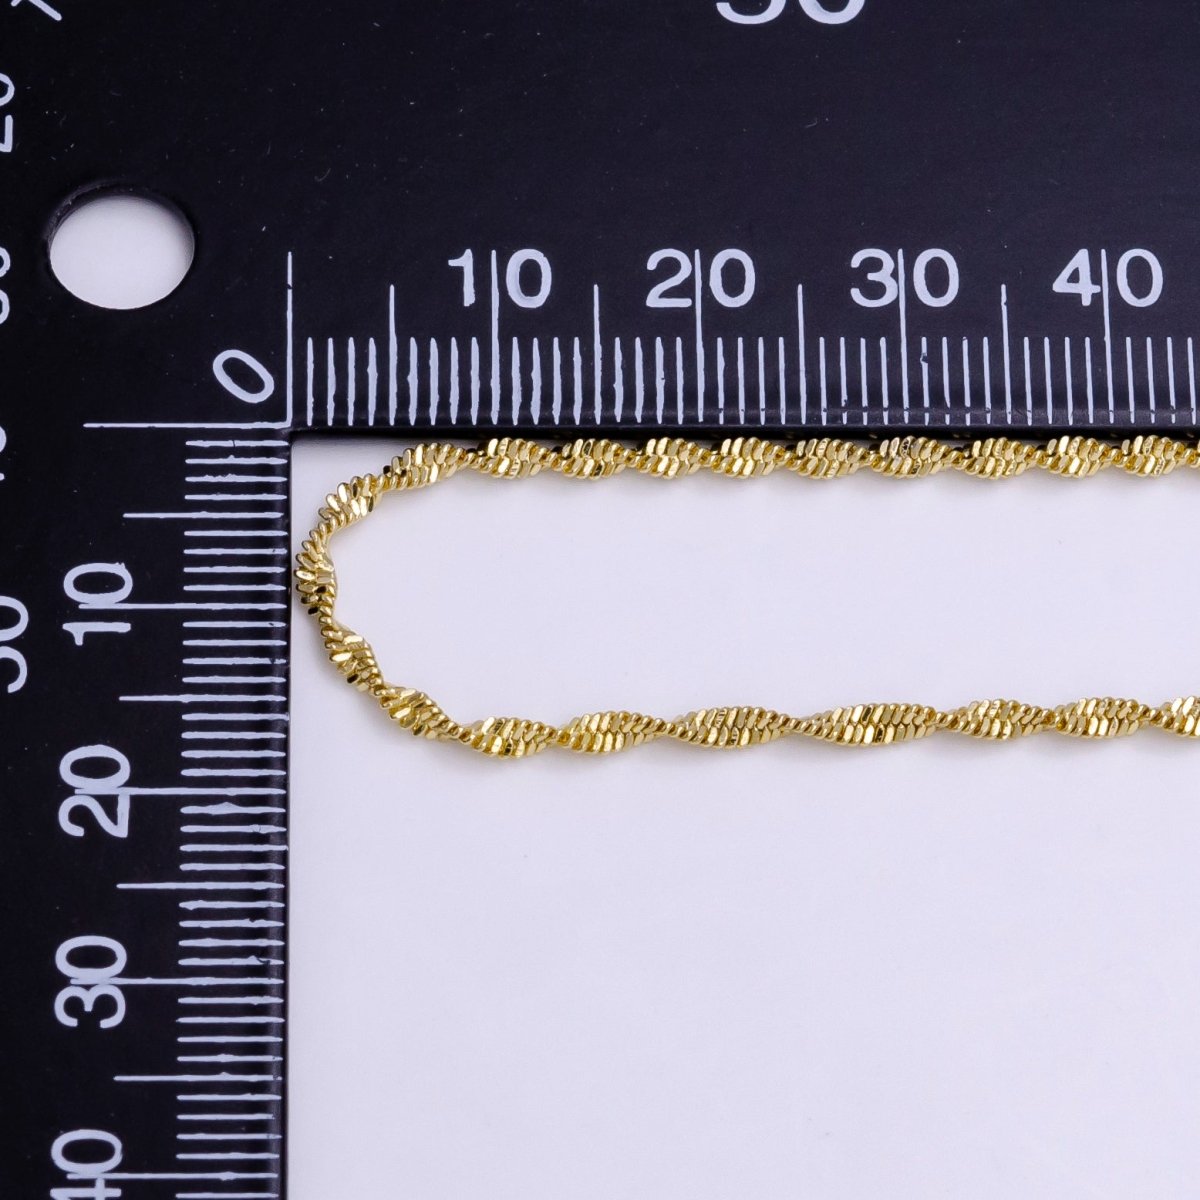 Dainty Gold Chain Necklace, Twist Singapore Chain Necklace Ready To Wear for Jewelry Making | WA-1118 Clearance Pricing - DLUXCA